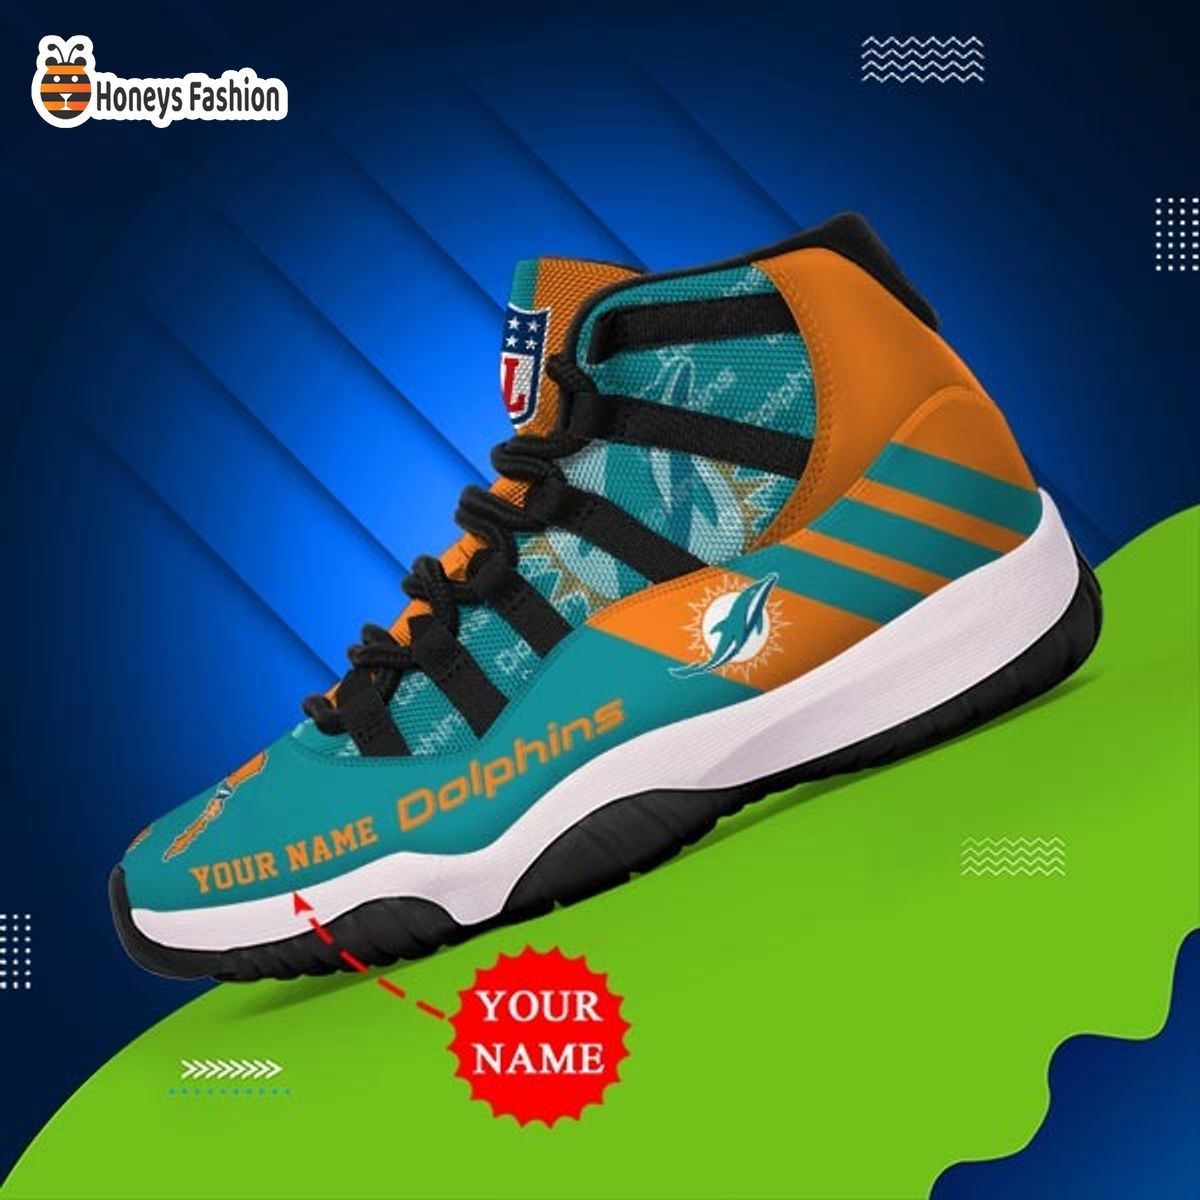 Miami Dolphins NFL Adidas Personalized Air Jordan 11 Shoes